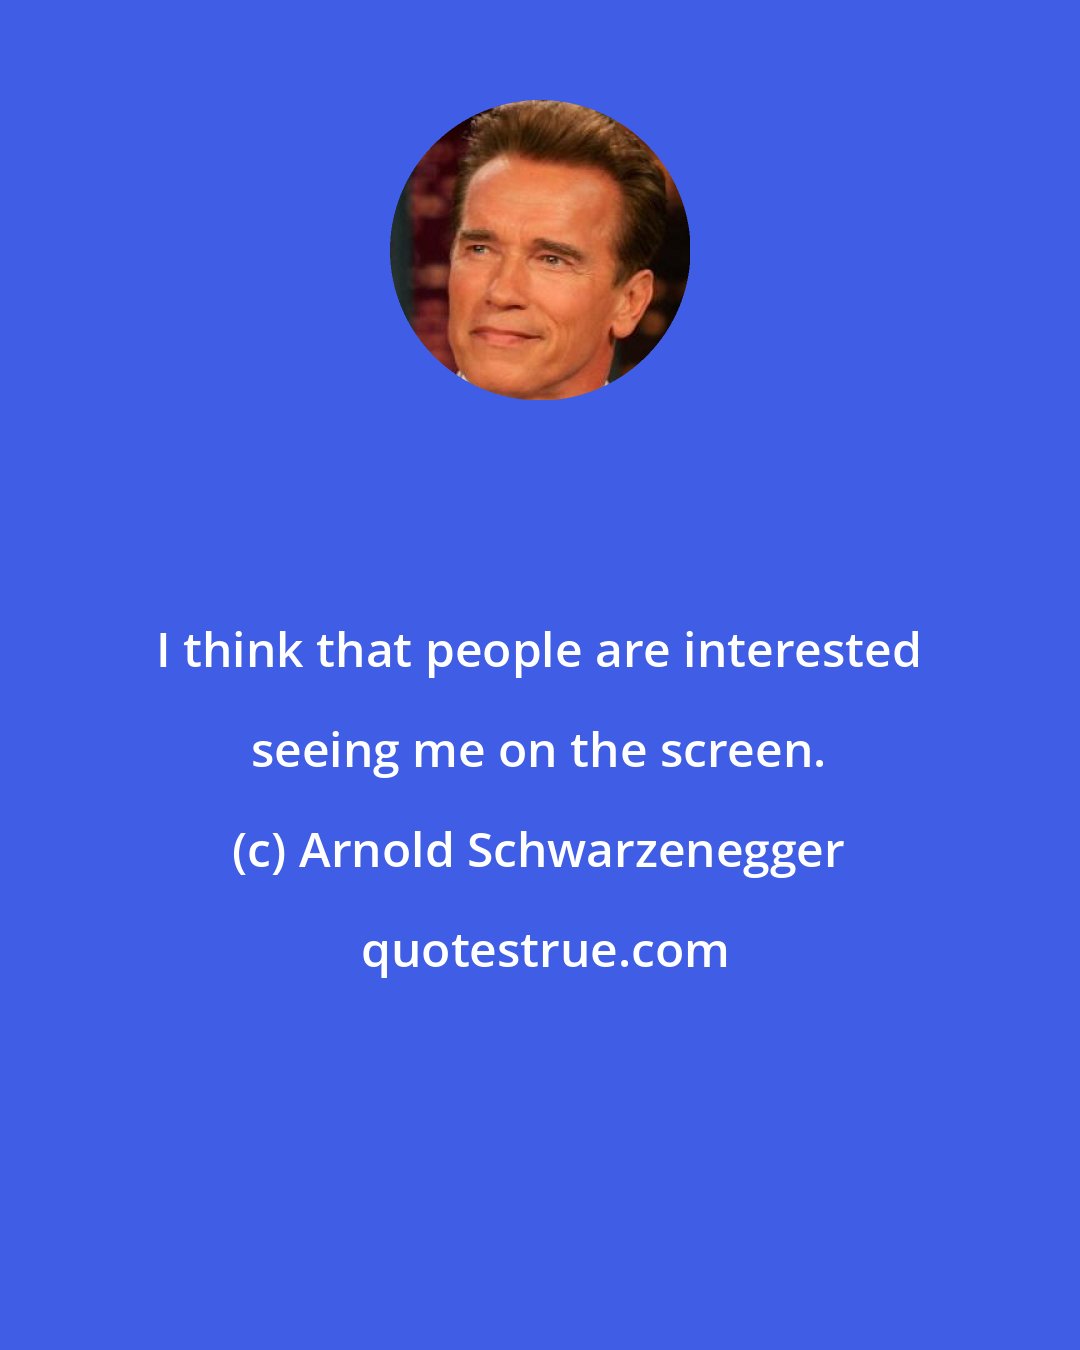 Arnold Schwarzenegger: I think that people are interested seeing me on the screen.